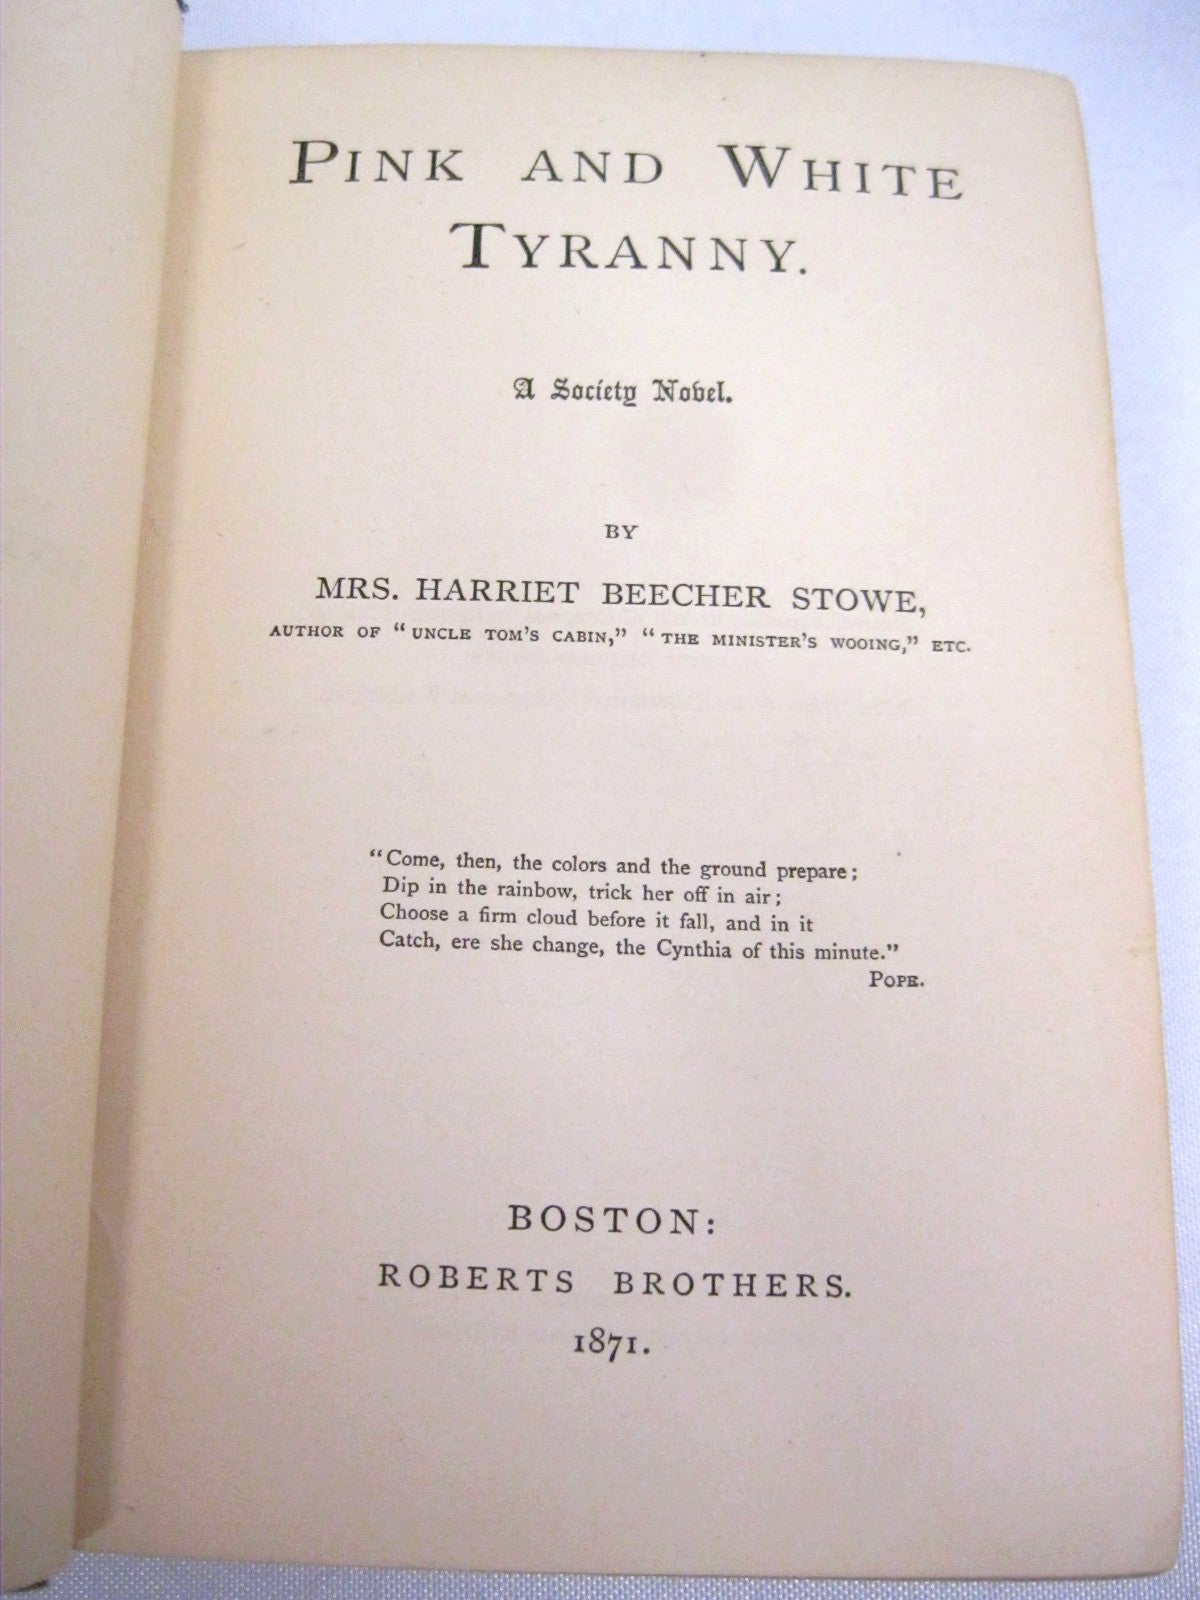 Pink and White Tyranny, a Society Novel by Harriet Beecher Stowe